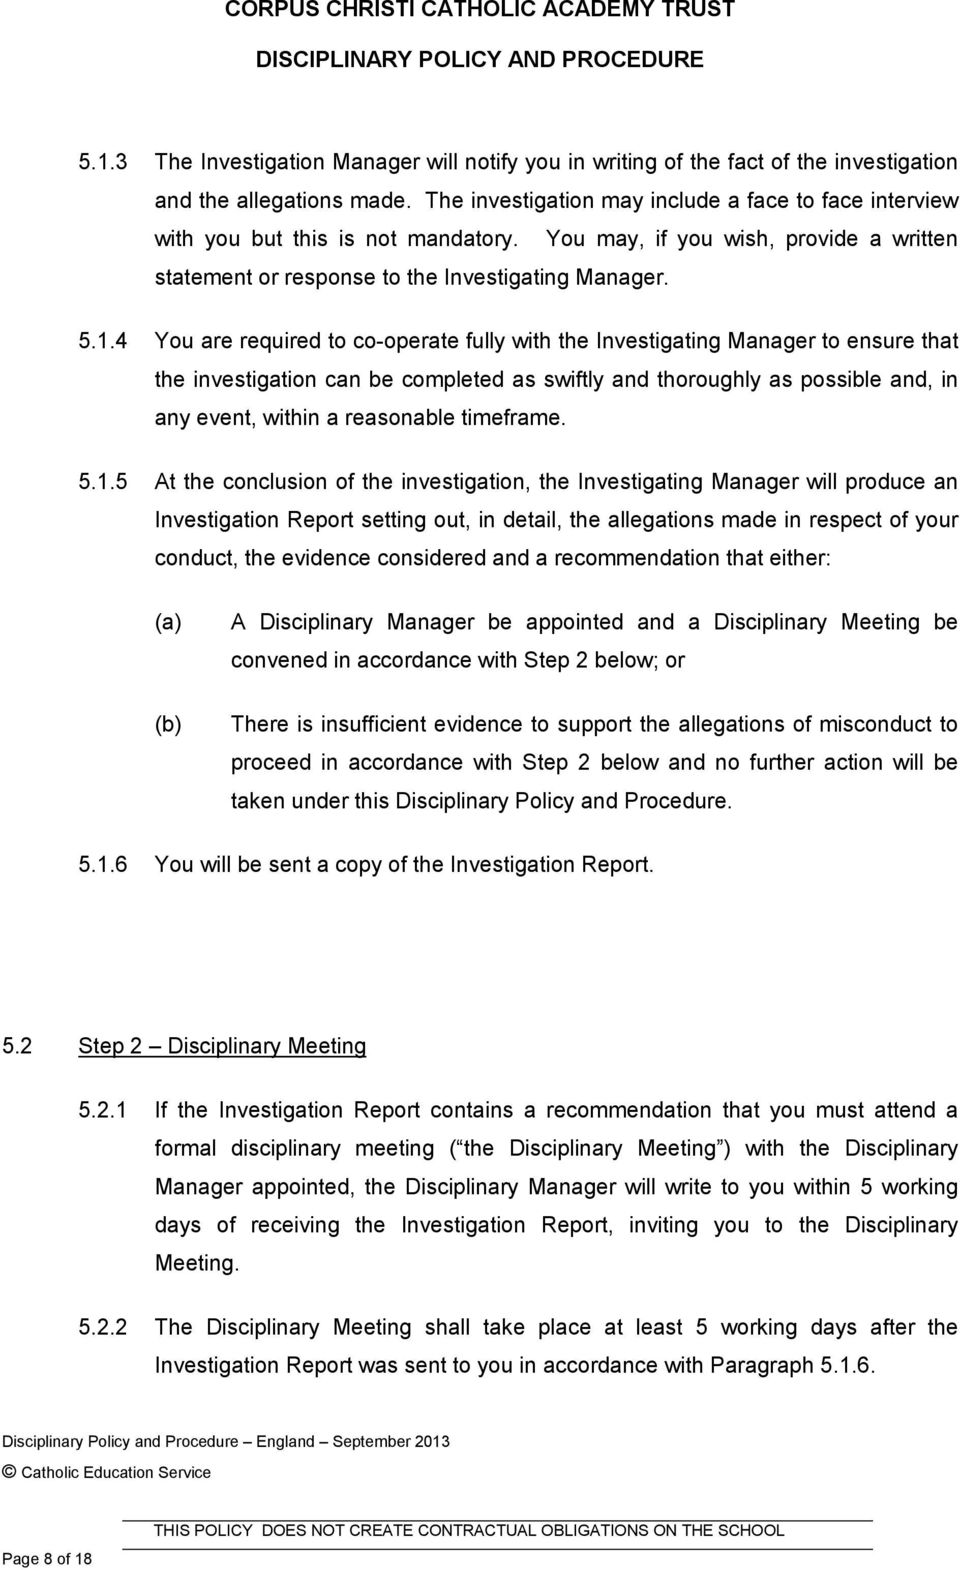 4 You are required to co-operate fully with the Investigating Manager to ensure that the investigation can be completed as swiftly and thoroughly as possible and, in any event, within a reasonable